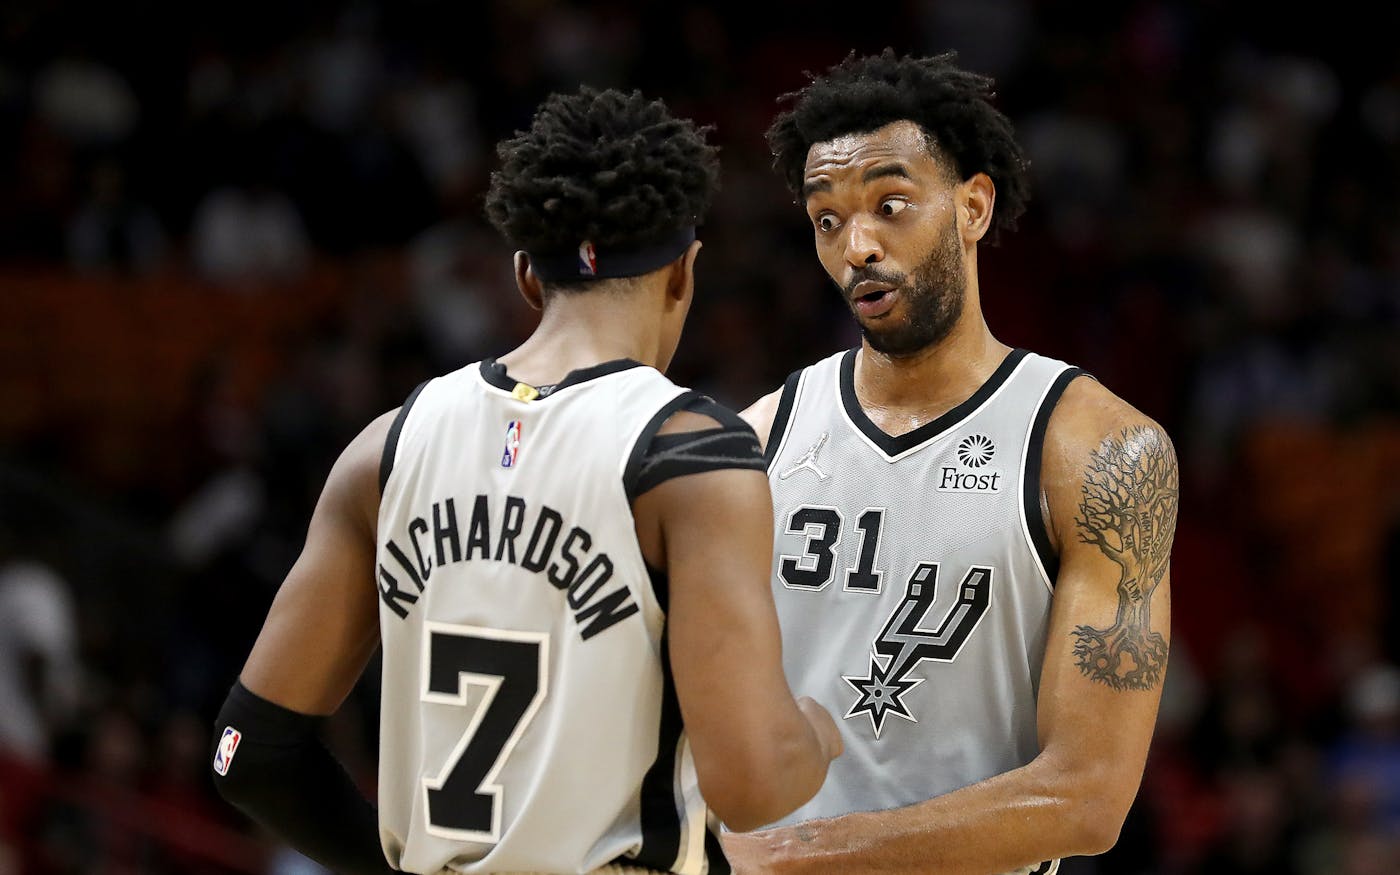 Report: Spurs rank fourth in NBA in local TV ratings